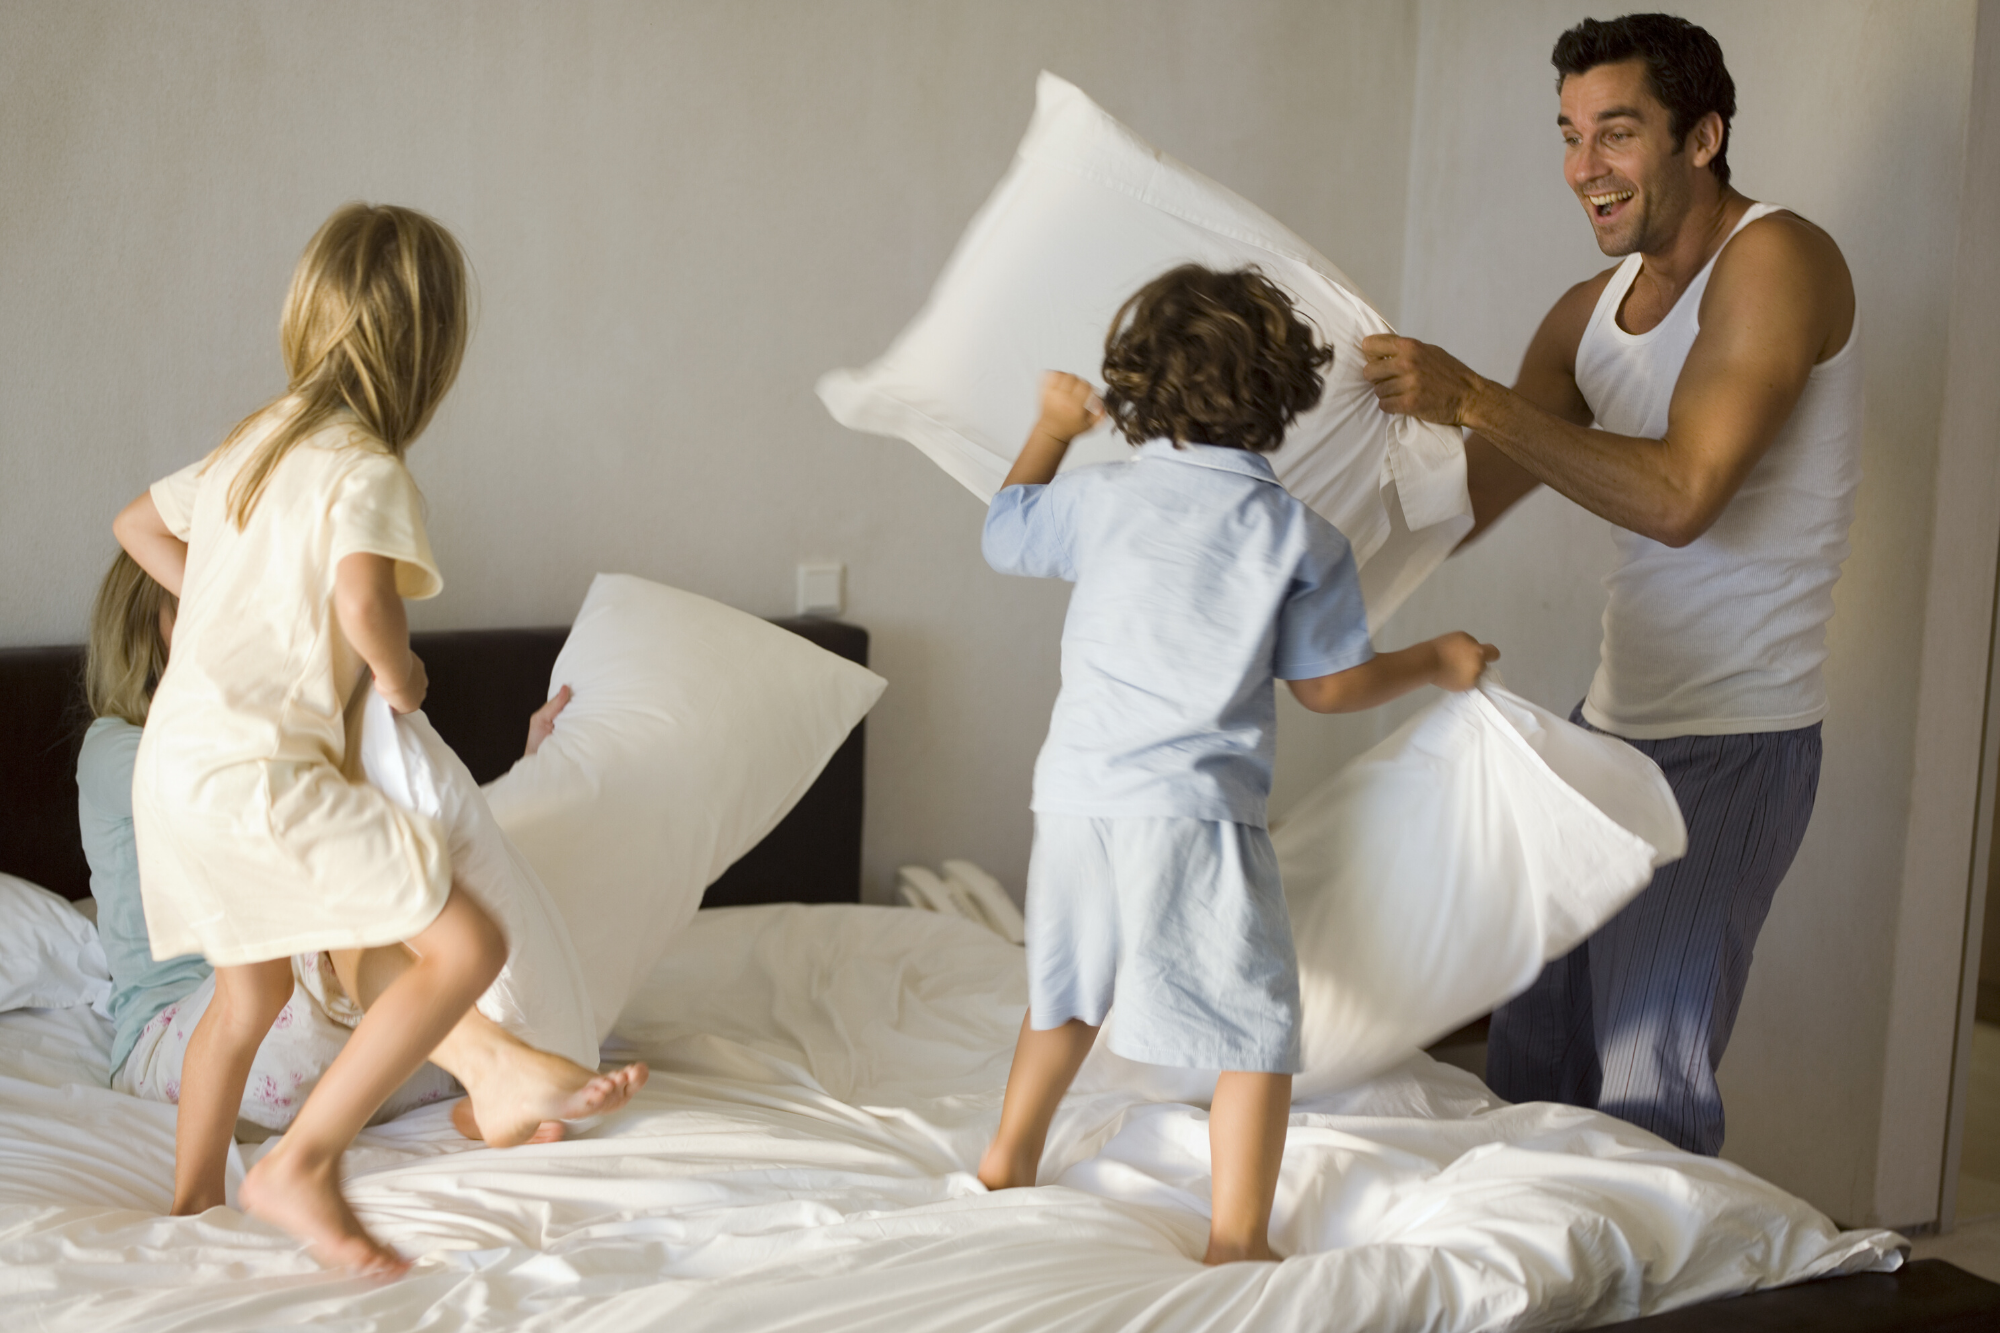 Dad having a pillow fight with his two toddlers in the bedroom